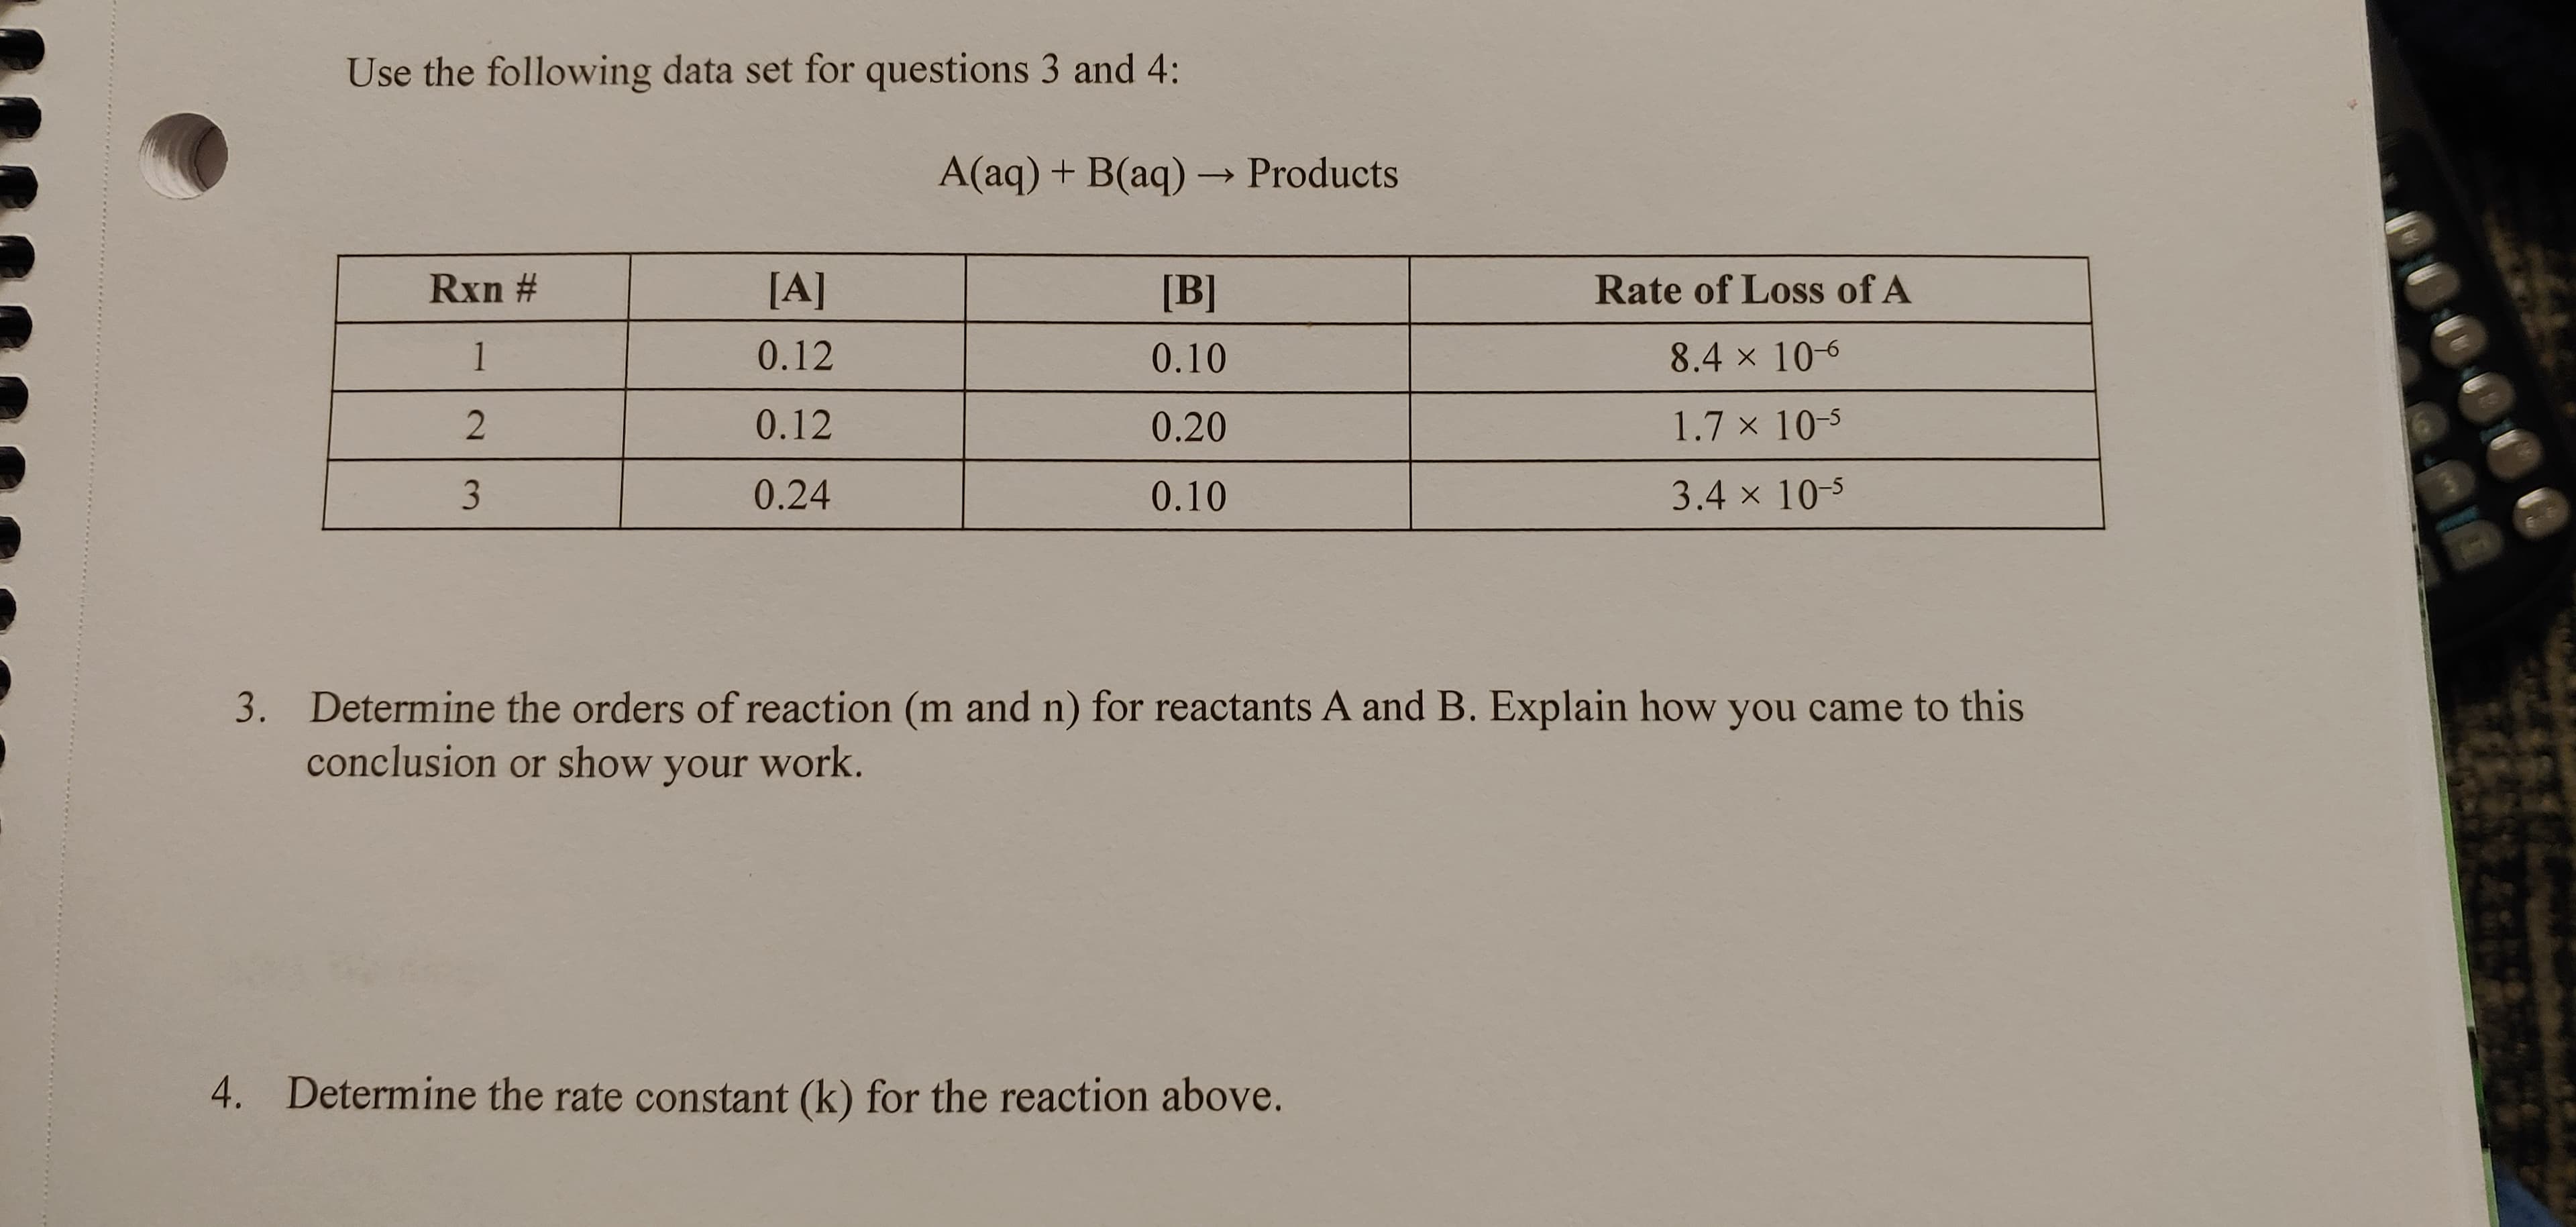 Use the following data set for questions 3 and 4:
A(aq) + B(aq) → Products
Rxn #
[A]
[B]
Rate of Loss of A
1
0.12
0.10
8.4 x 10-6
0.12
0.20
1.7 x 10-5
0.24
0.10
3.4 x 10-5
3. Determine the orders of reaction (m and n) for reactants A and B. Explain how you came to this
conclusion or show your work.
4.
Determine the rate constant (k) for the reaction above.
